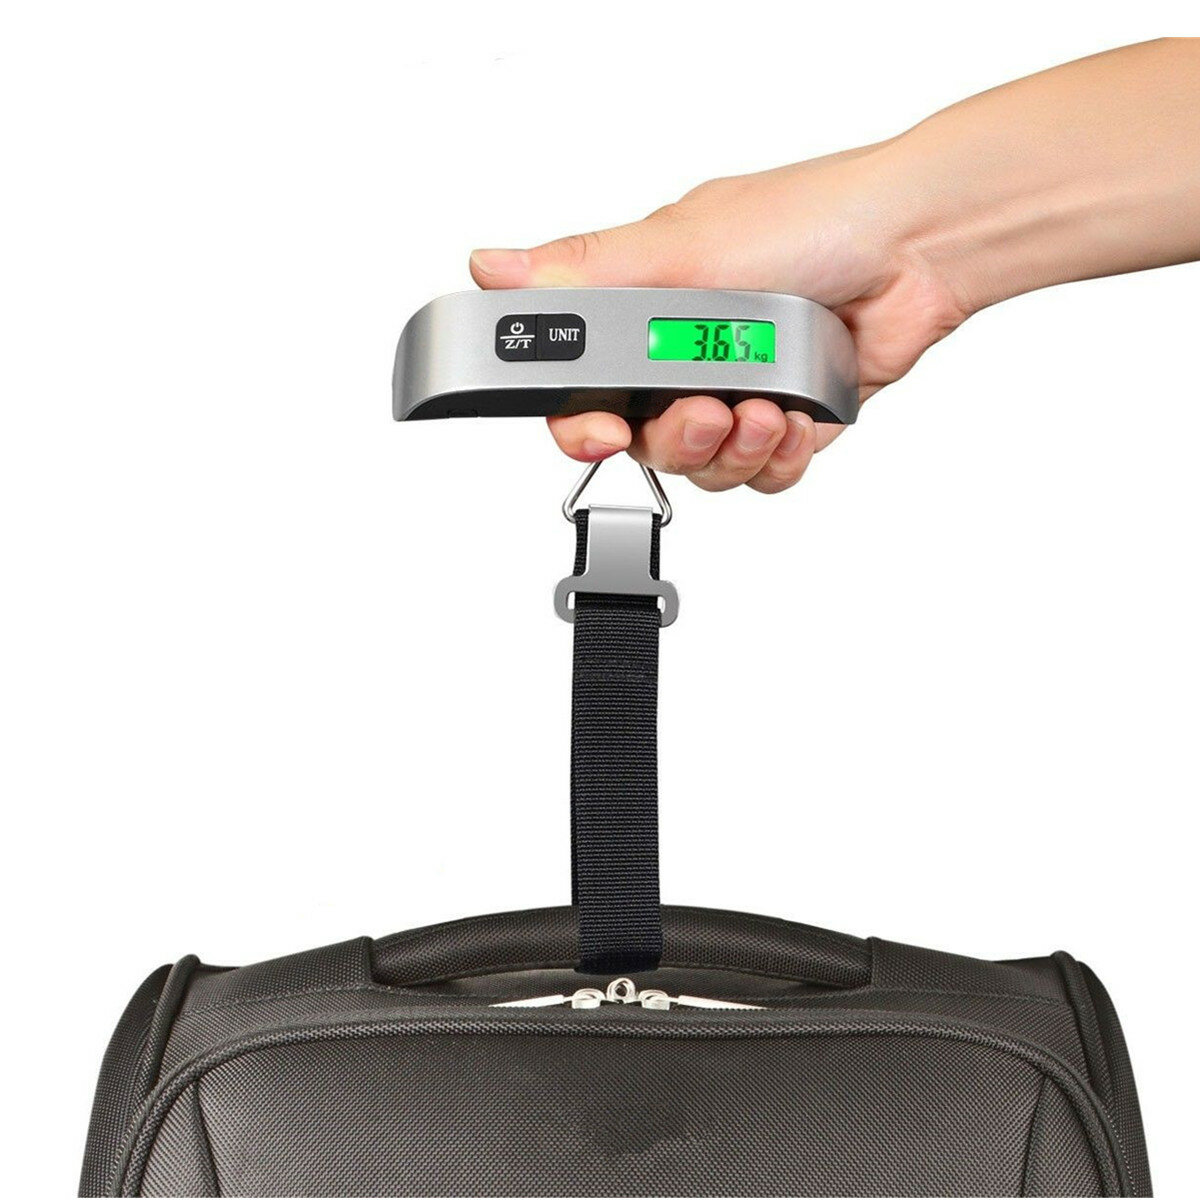 luggage weight scale